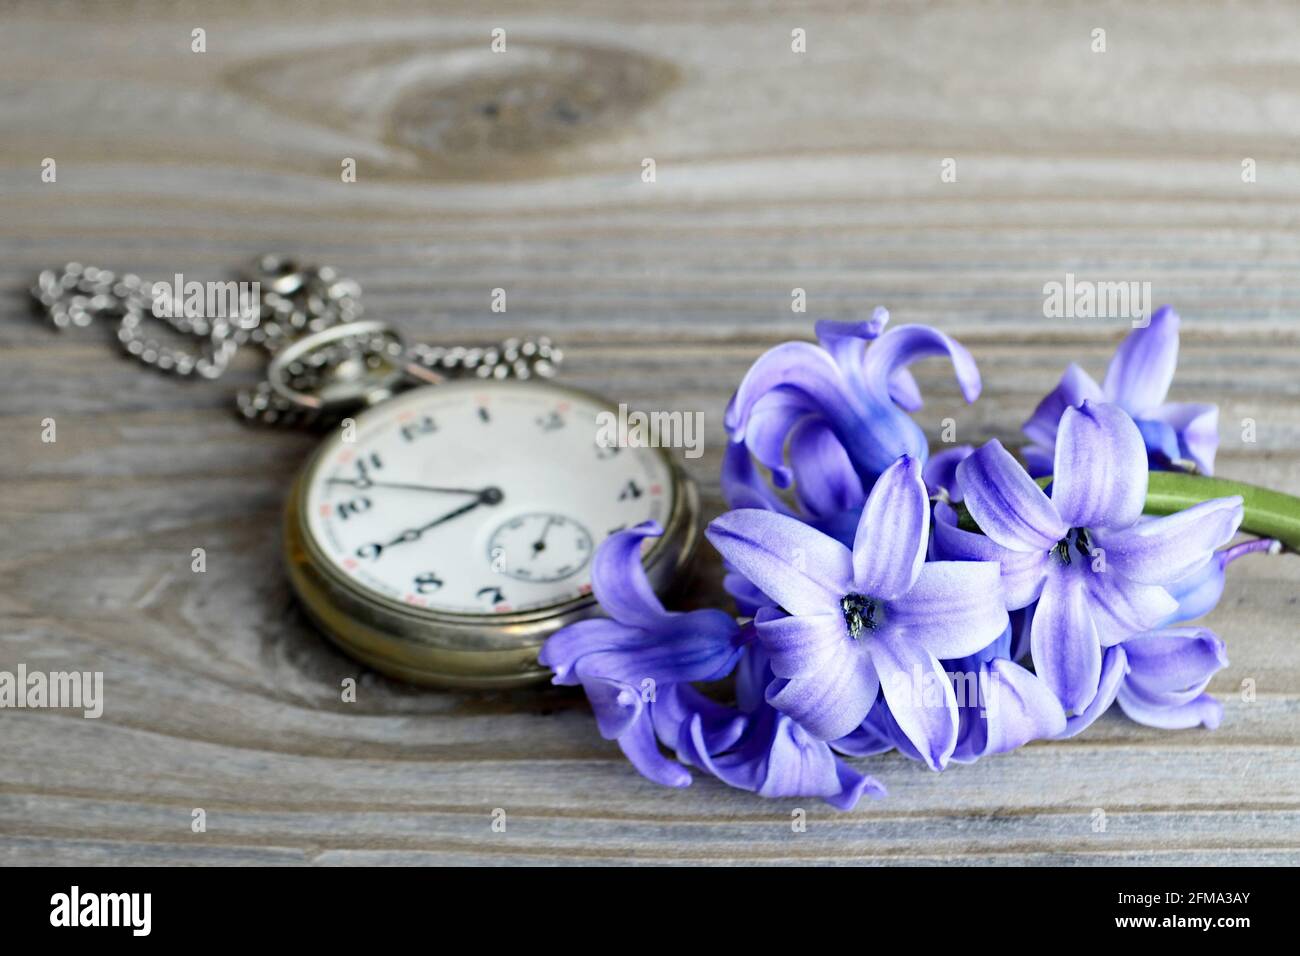 Fathers day flower and vintage pocket watch on wooden background Stock Photo